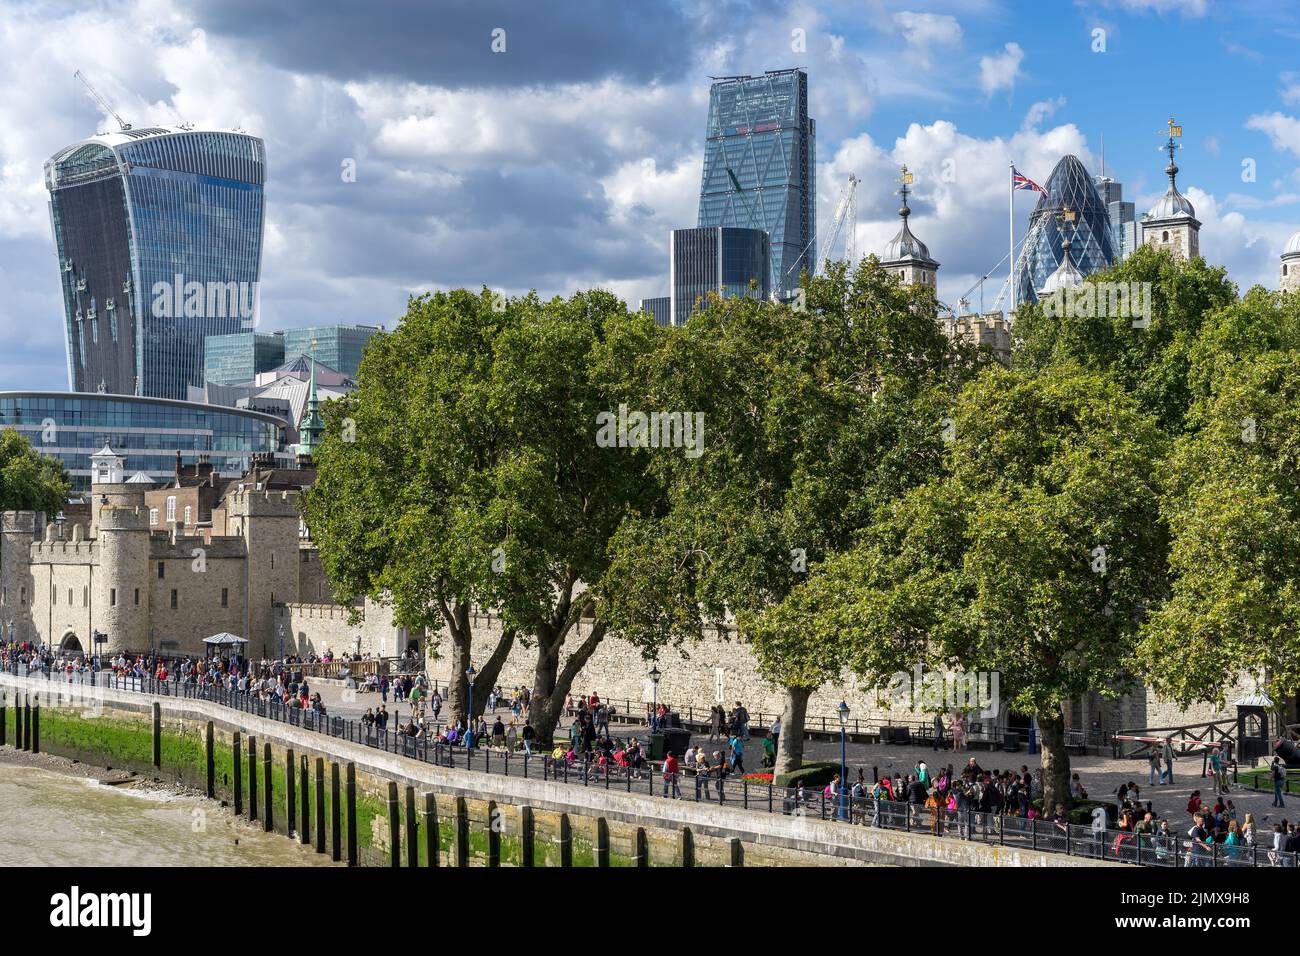 View of modern architecture in the City of London Stock Photo